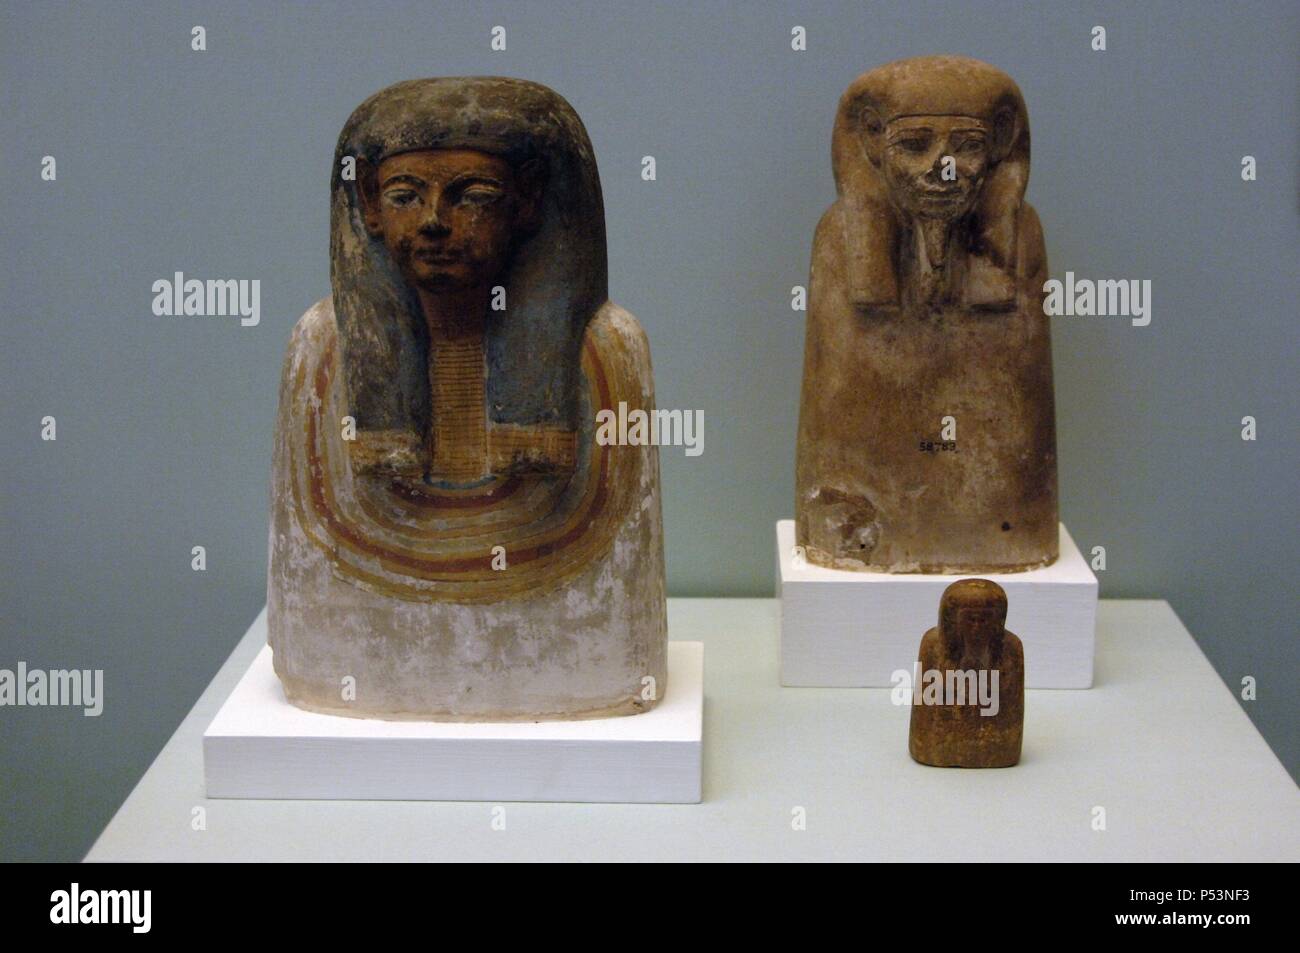 Busts of ancestors. First, polychromed limestone bust, from Thebes. At background, limestone bust of unknown origin. Both dated from 1300-1150 BC. On the right, and the smaller, wooden bust dated 1550-1070 BC, also of unknown origin. 19th and 20th Dynasties. New Kingdom. British Museum. London. United Kingdom. Stock Photo